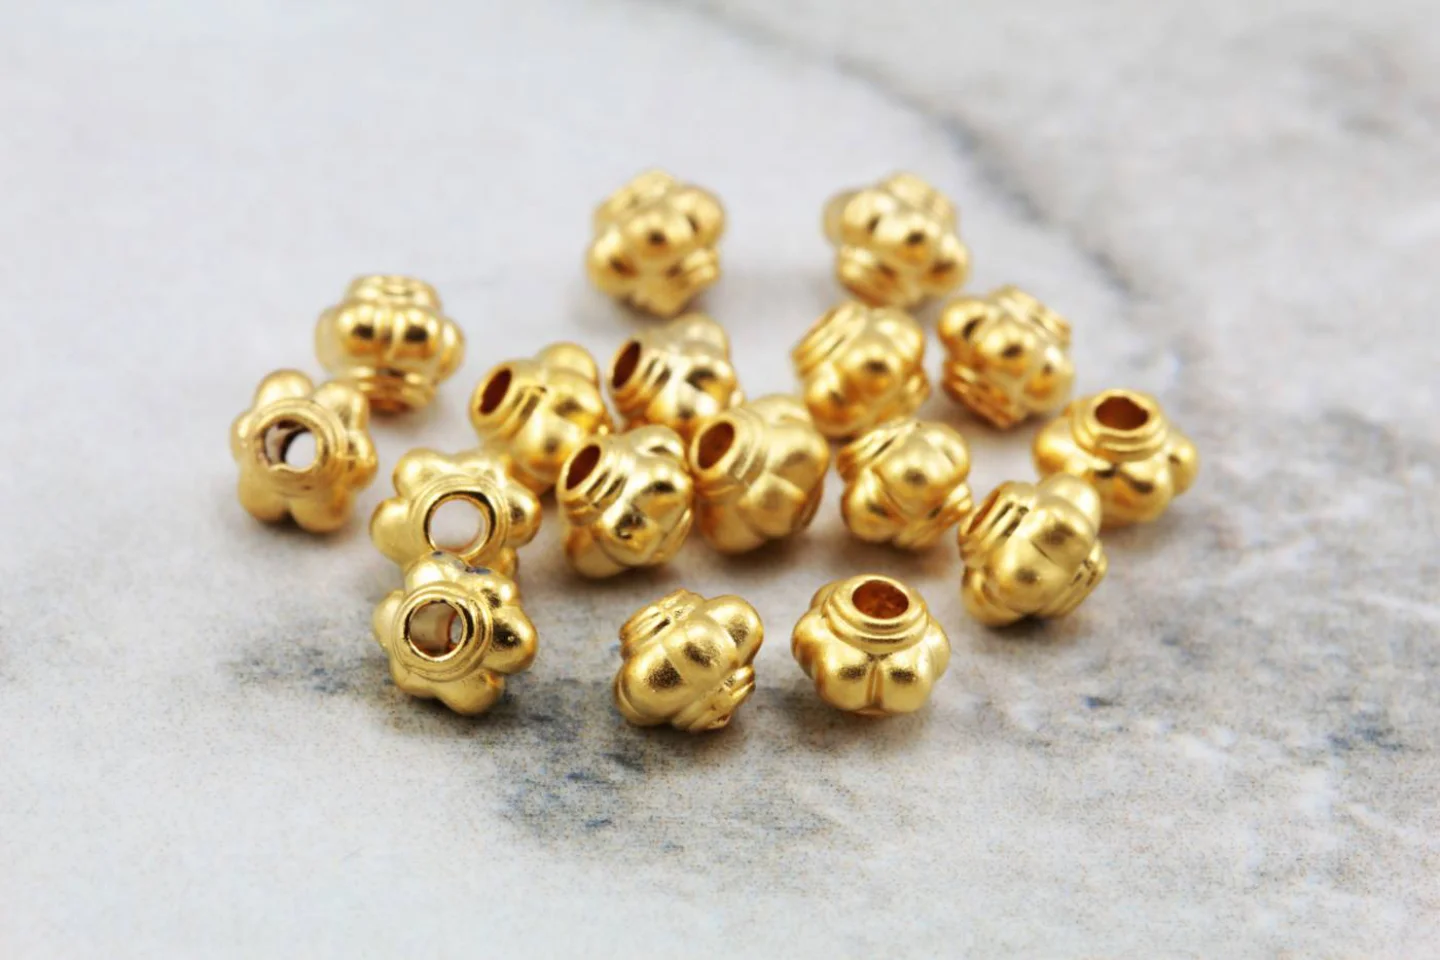 gold-plate-round-5mm-spacer-bead-finding.